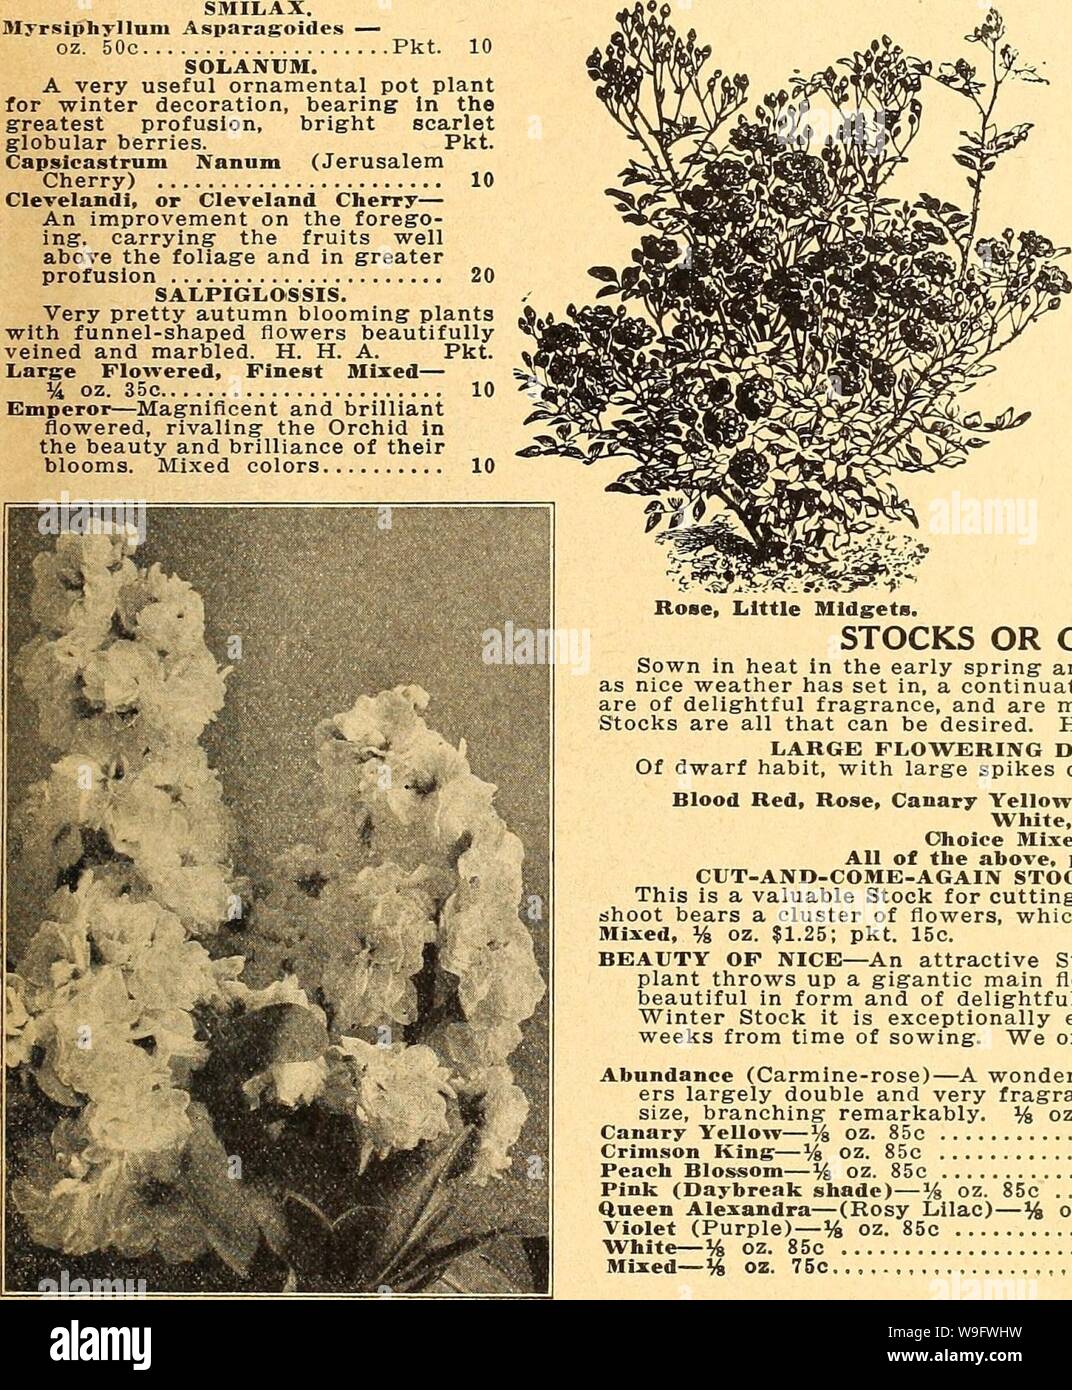 Archive image from page 74 of Currie's farm and garden annual. Currie's farm and garden annual : spring 1927 52nd year  curriesfarmgarde19curr 10 Year: 1927 ( 10 SMILAX. BIyrsiphyllum Asparagoides — oz. 50c Pkt. 10 SOIiANUM. A very useful ornamental pot plant for winter decoration, bearing in the greatest profusion, bright scarlet globular berries. Pkt. Capsicastrum Nanum (Jerusalem Cherry) 10 Clevelandi, or Cleveland Cherry— An improvement on the forego- ing, carrying the fruits well above the foliage and in greater profusion 20 SALPIGLOSSIS. Very pretty autumn blooming plants with funnel-sha Stock Photo